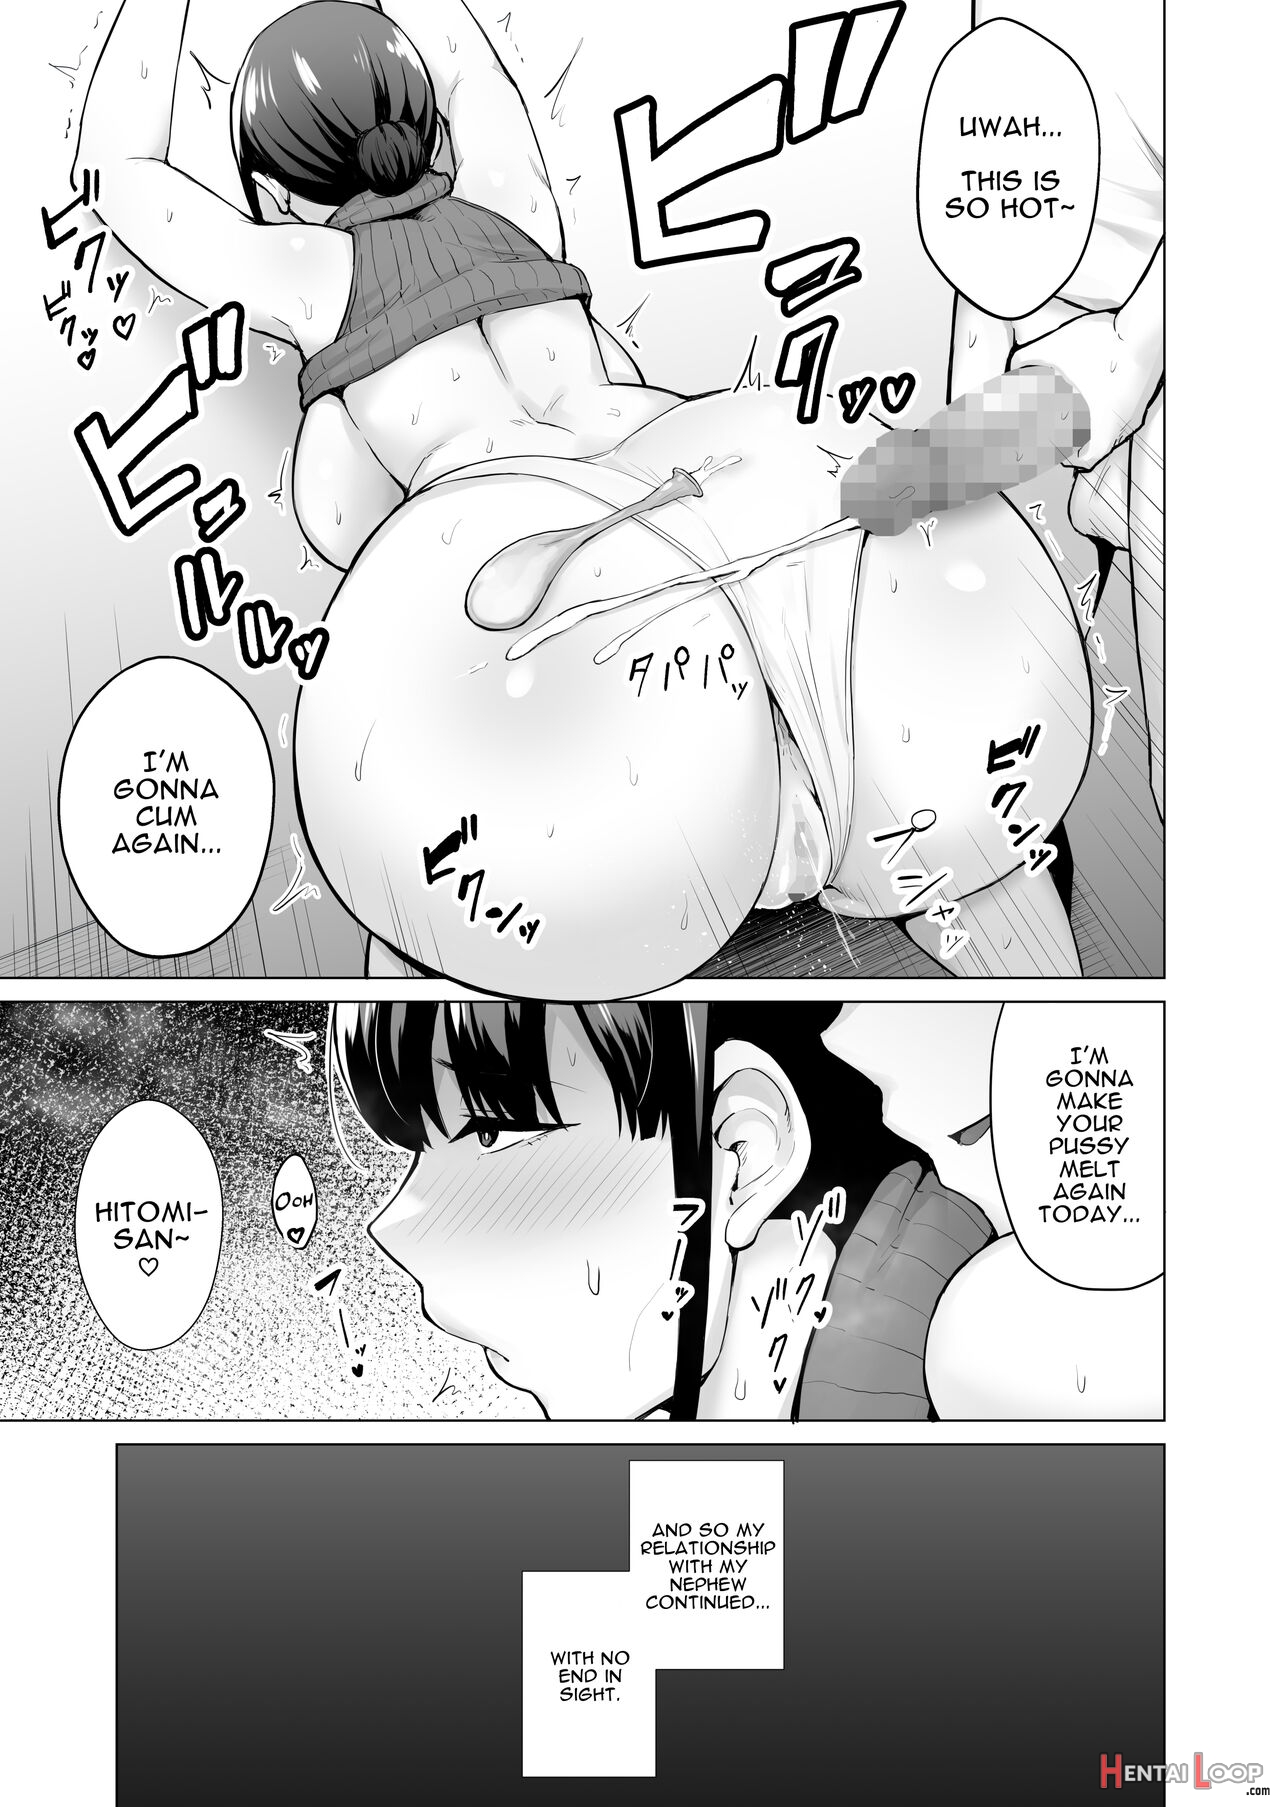 Housewife Ntr Stealing Hitomi - A Prim And Proper Housewife With Big Tits page 17